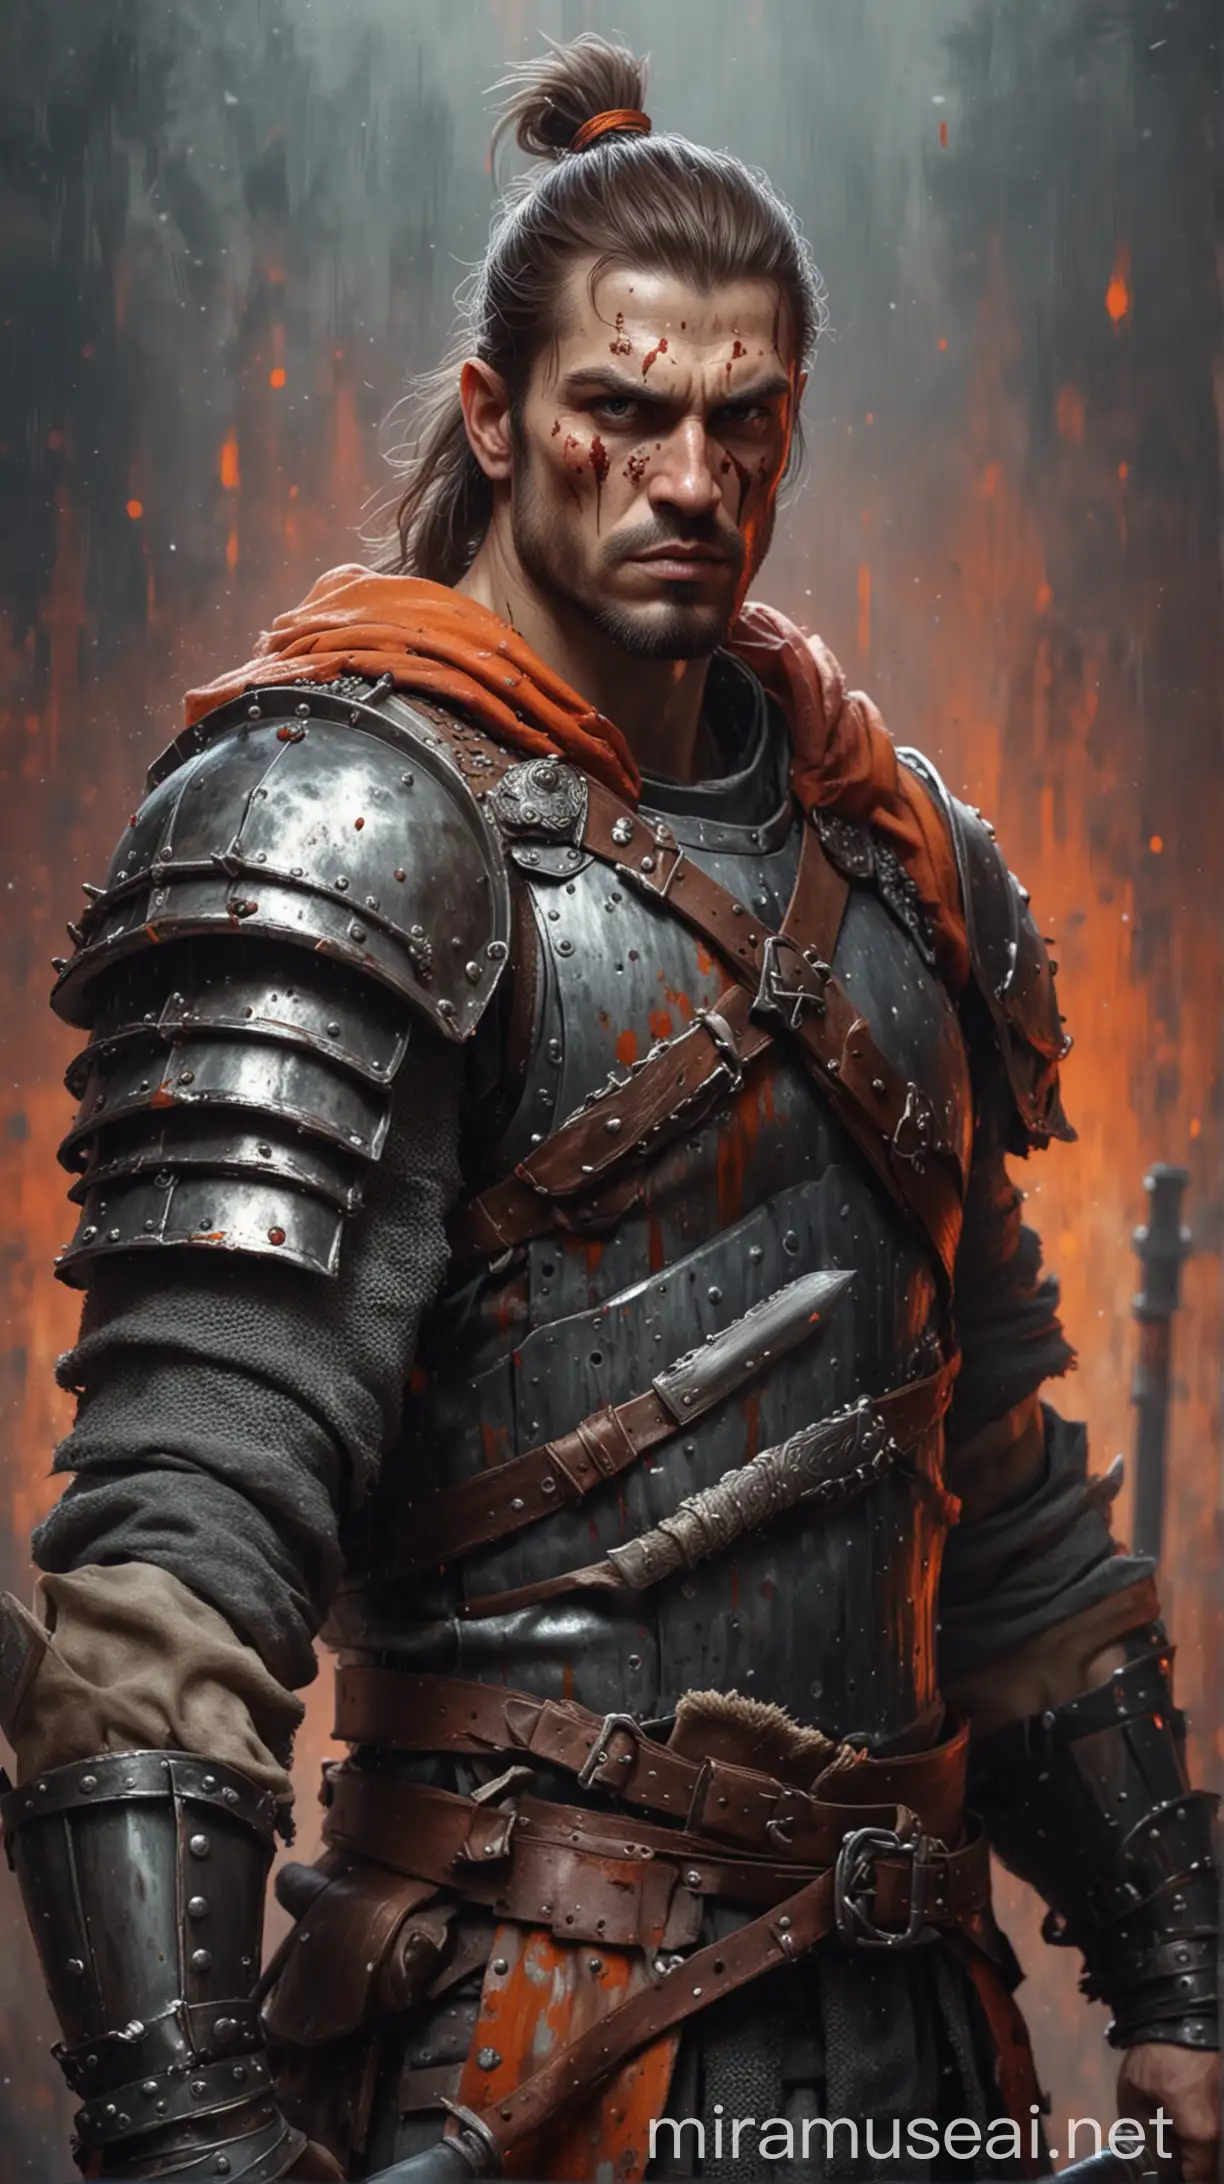 Fantasy Character muscular medieval warrior, seen from the front, in a medium frame shot, in cold tones, with a steel mallet resting on his shoulder, background of orange and red spots. oil painting style. 4k